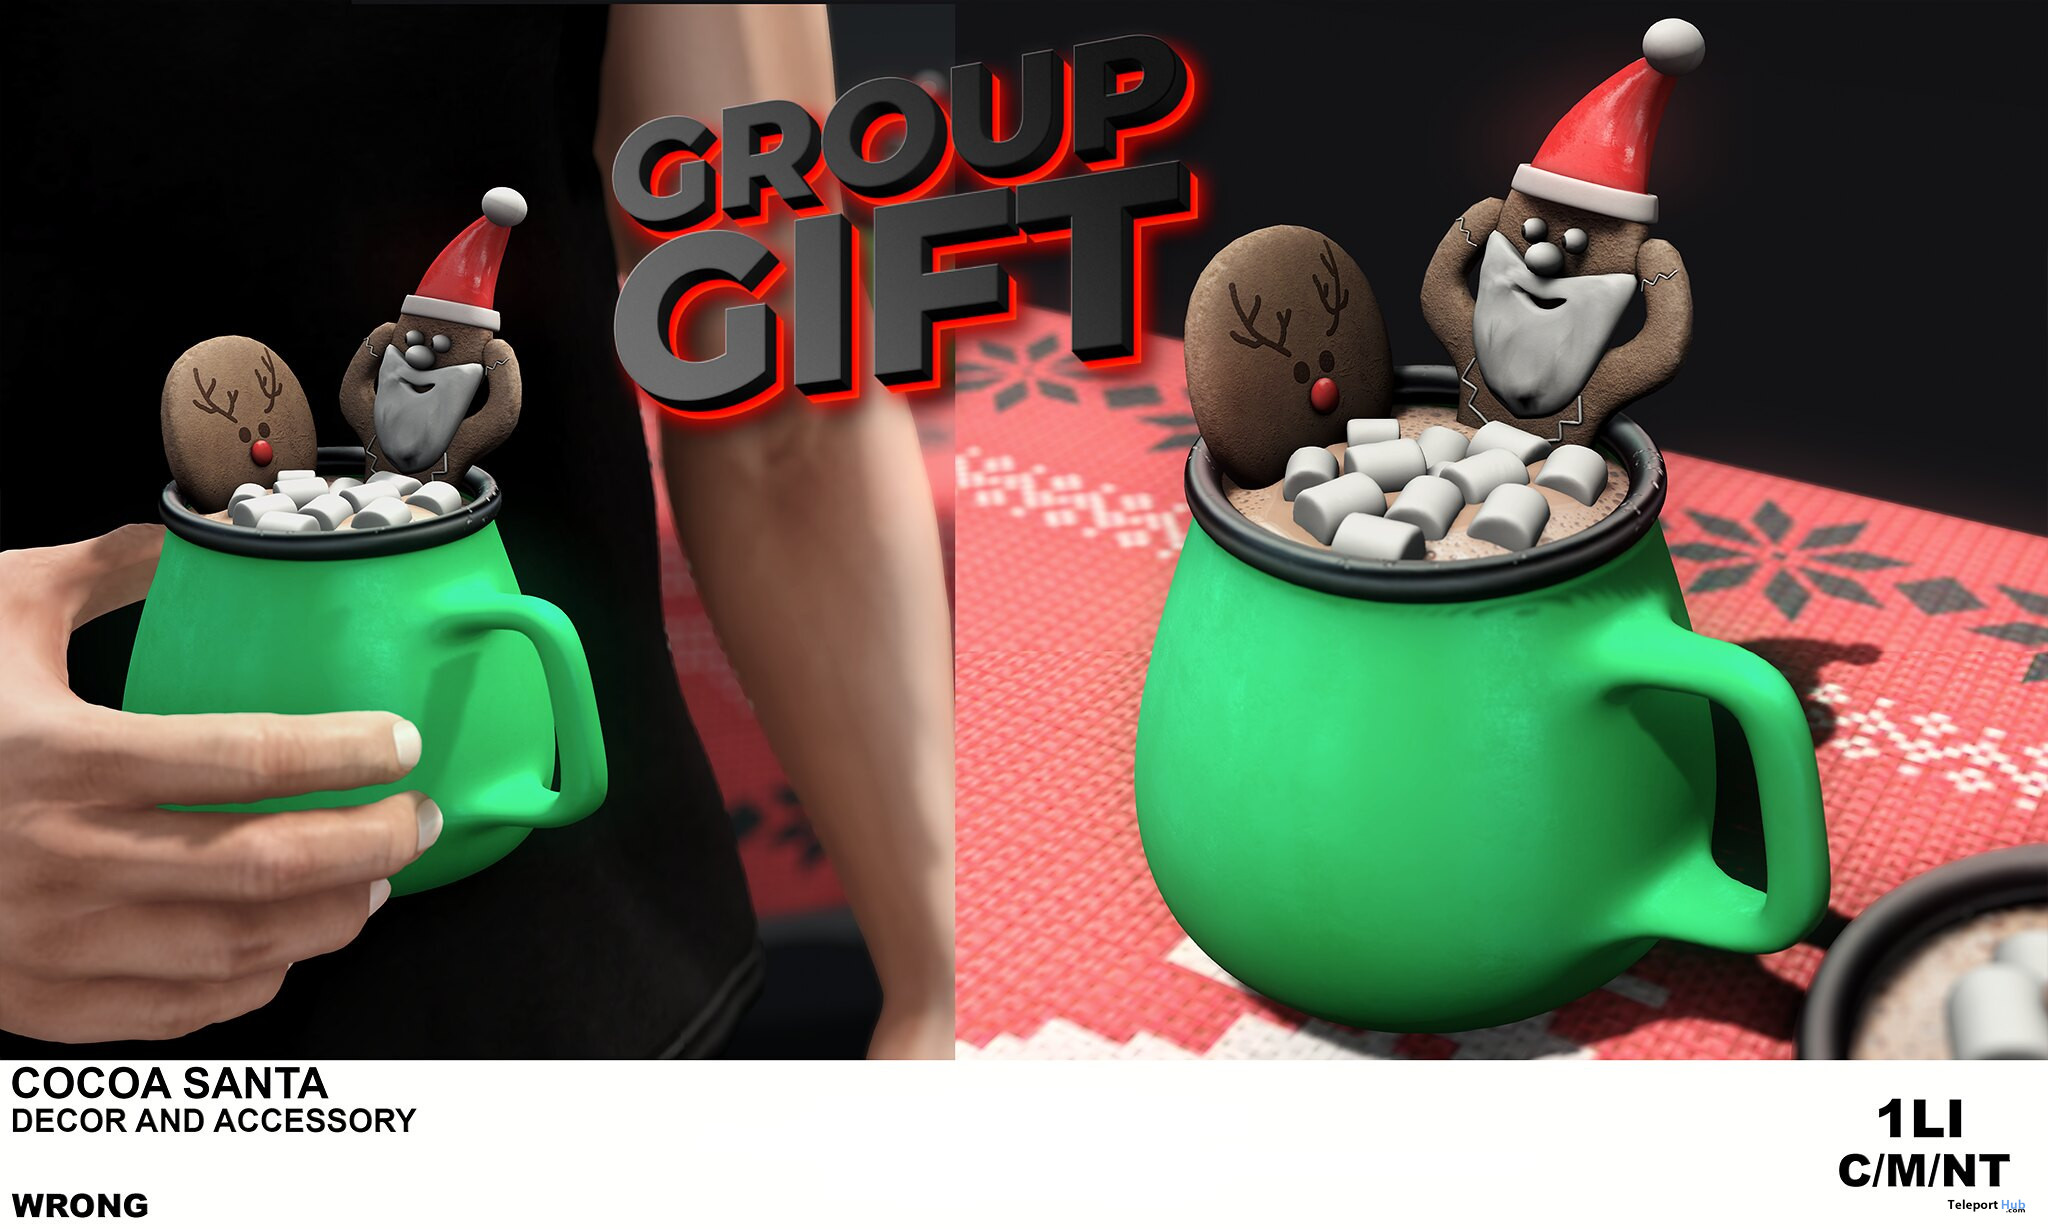 Cocoa Santa Drink December 2021 Group Gift by WRONG - Teleport Hub - teleporthub.com